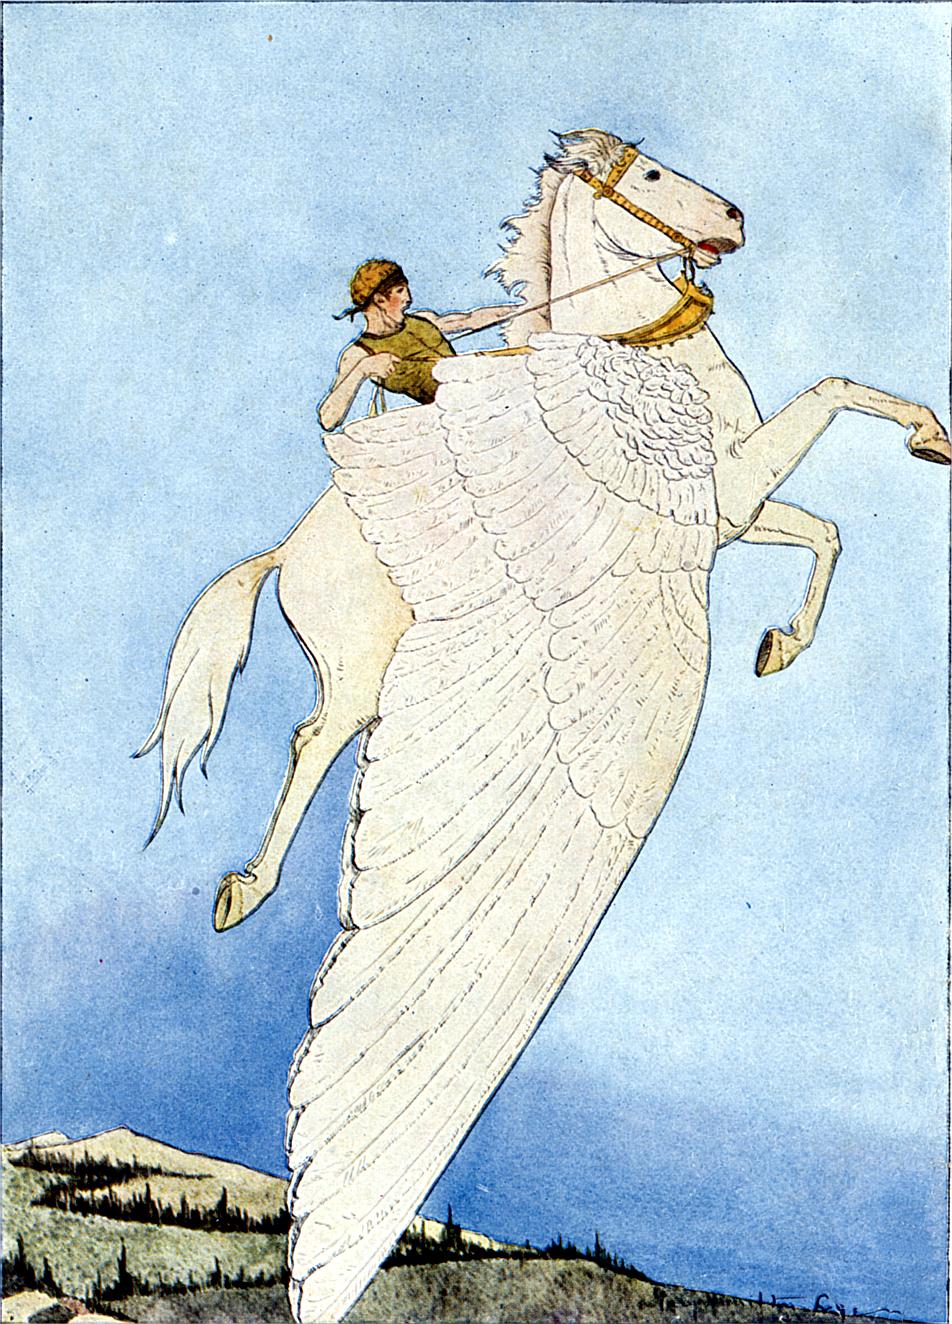 A man rides a winged horse up into the sky.